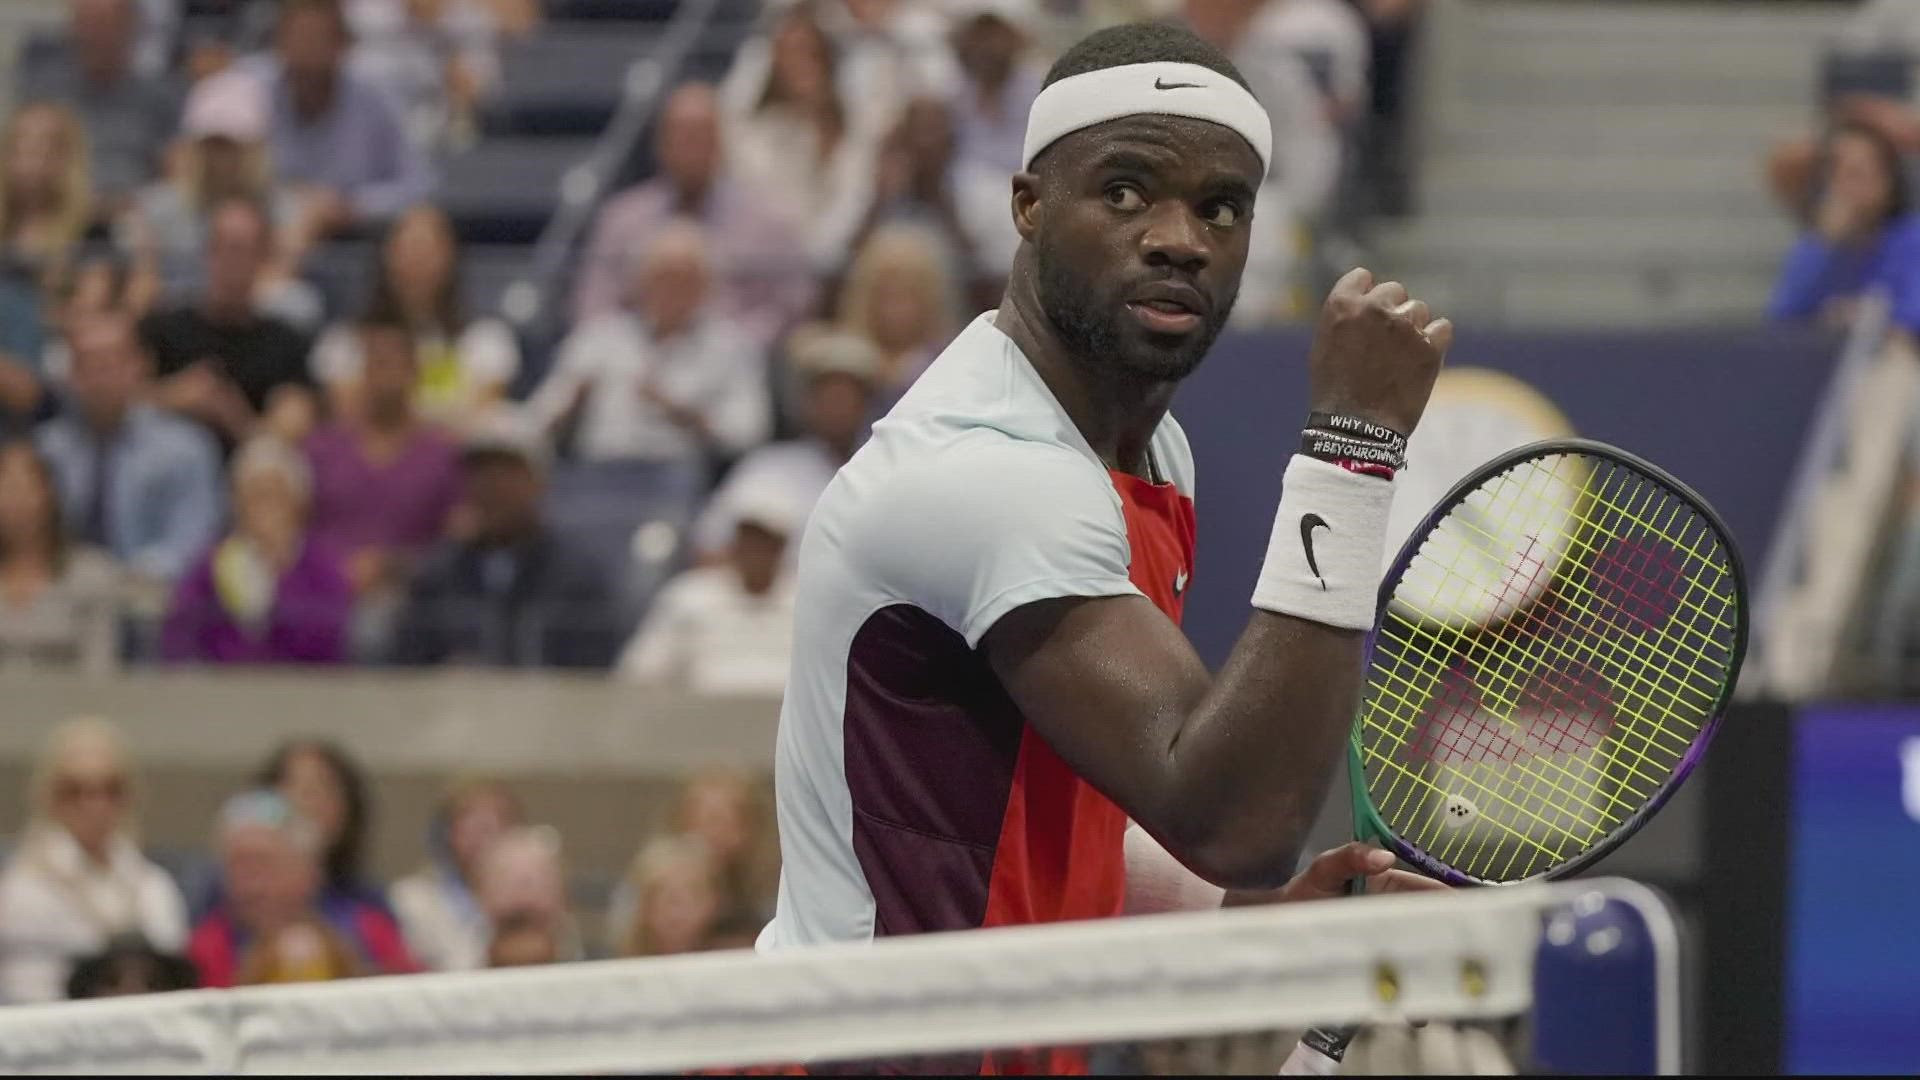 Frances Tiafoe’s tennis journey started at the Junior Tennis Champions Center in Washington, D.C. back in 1999.